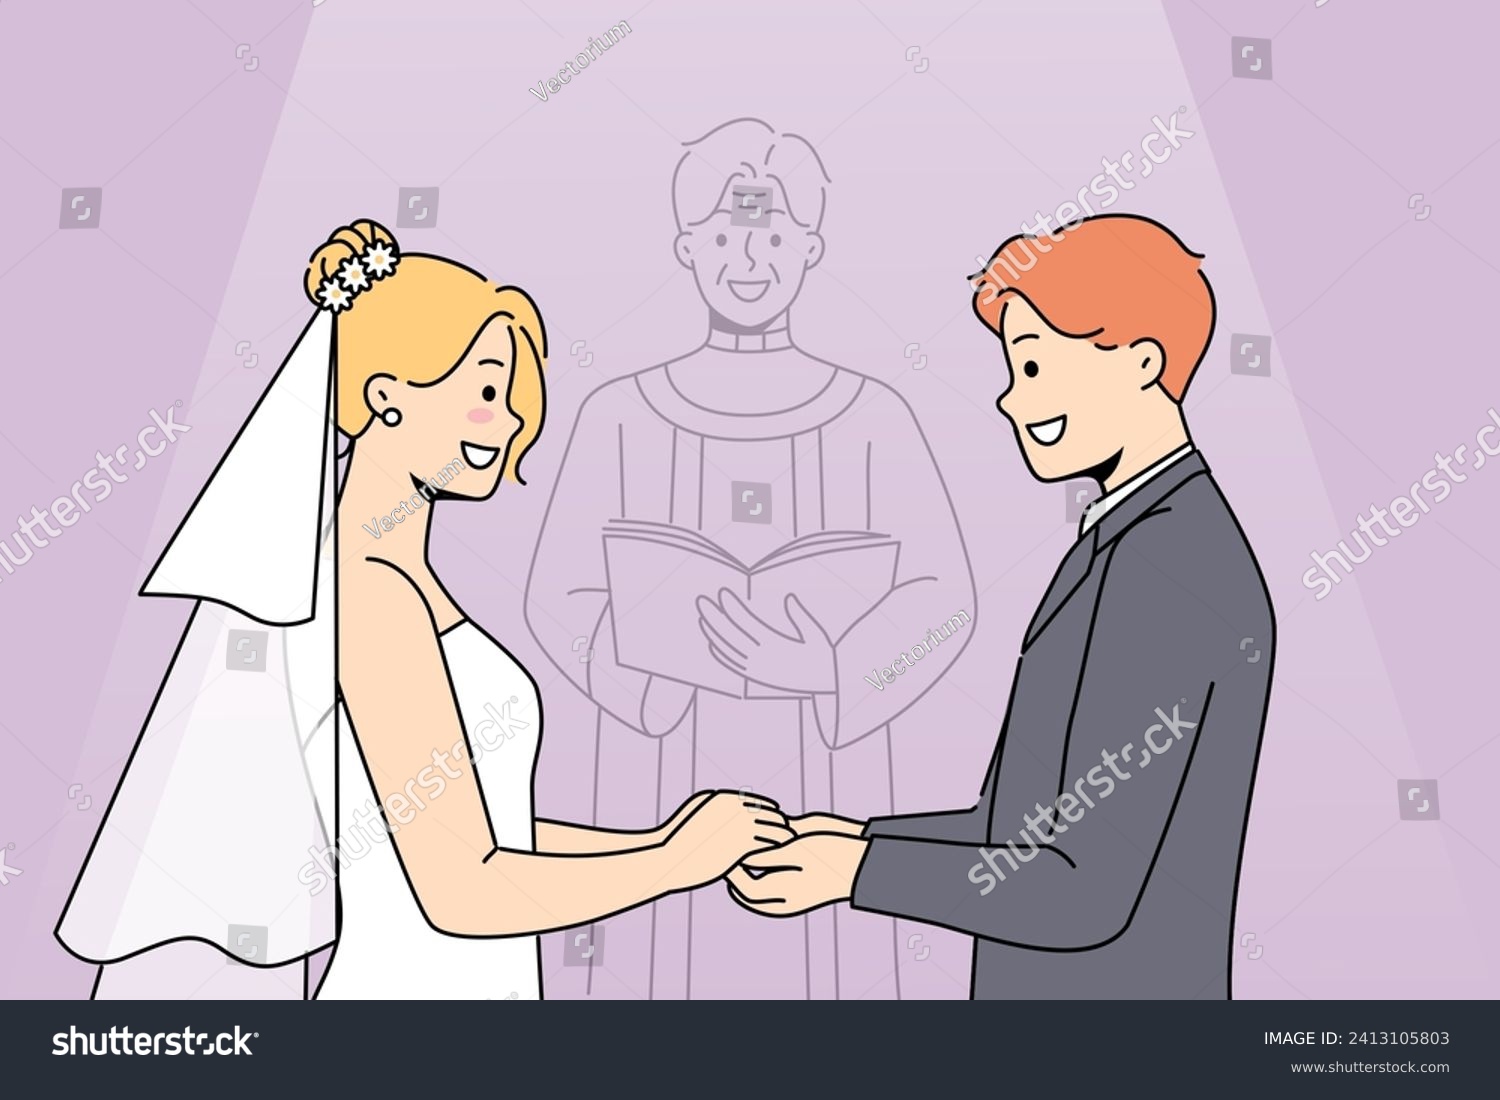 Marriage ceremony of man and woman holding hands, standing near altar with candlestick. Marriage of religious catholics wishing to get married and receive blessing from holy father #2413105803